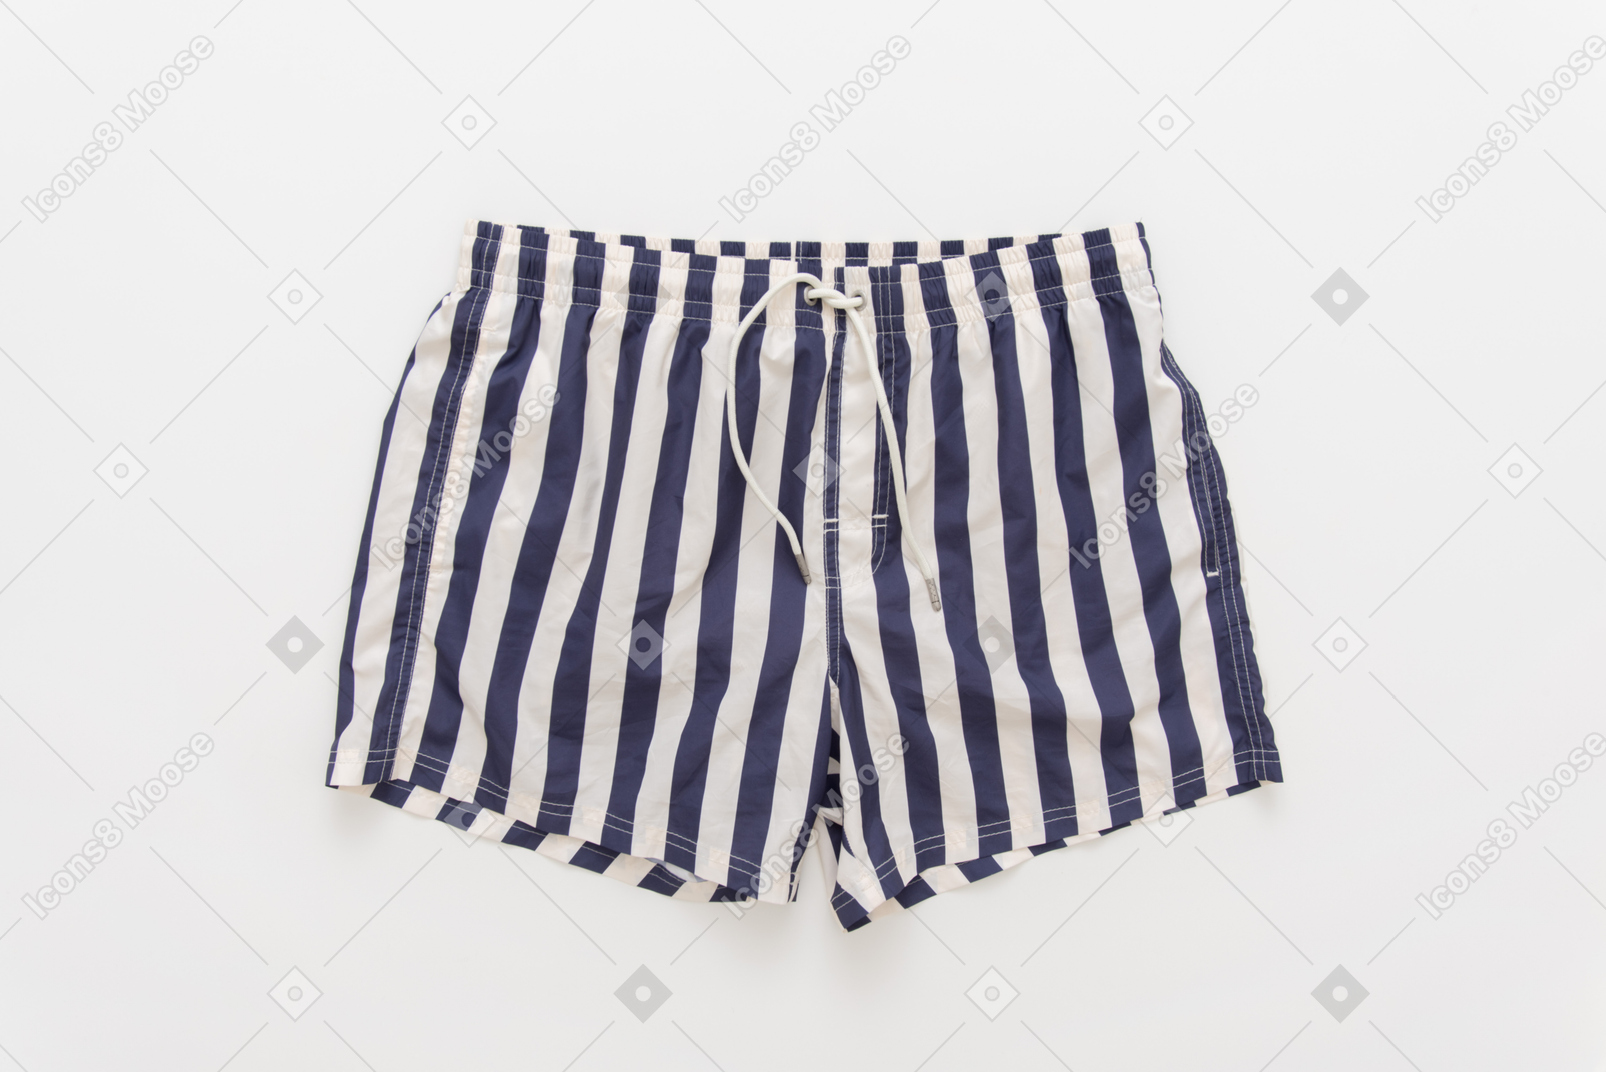 Blue and white man's striped shorts